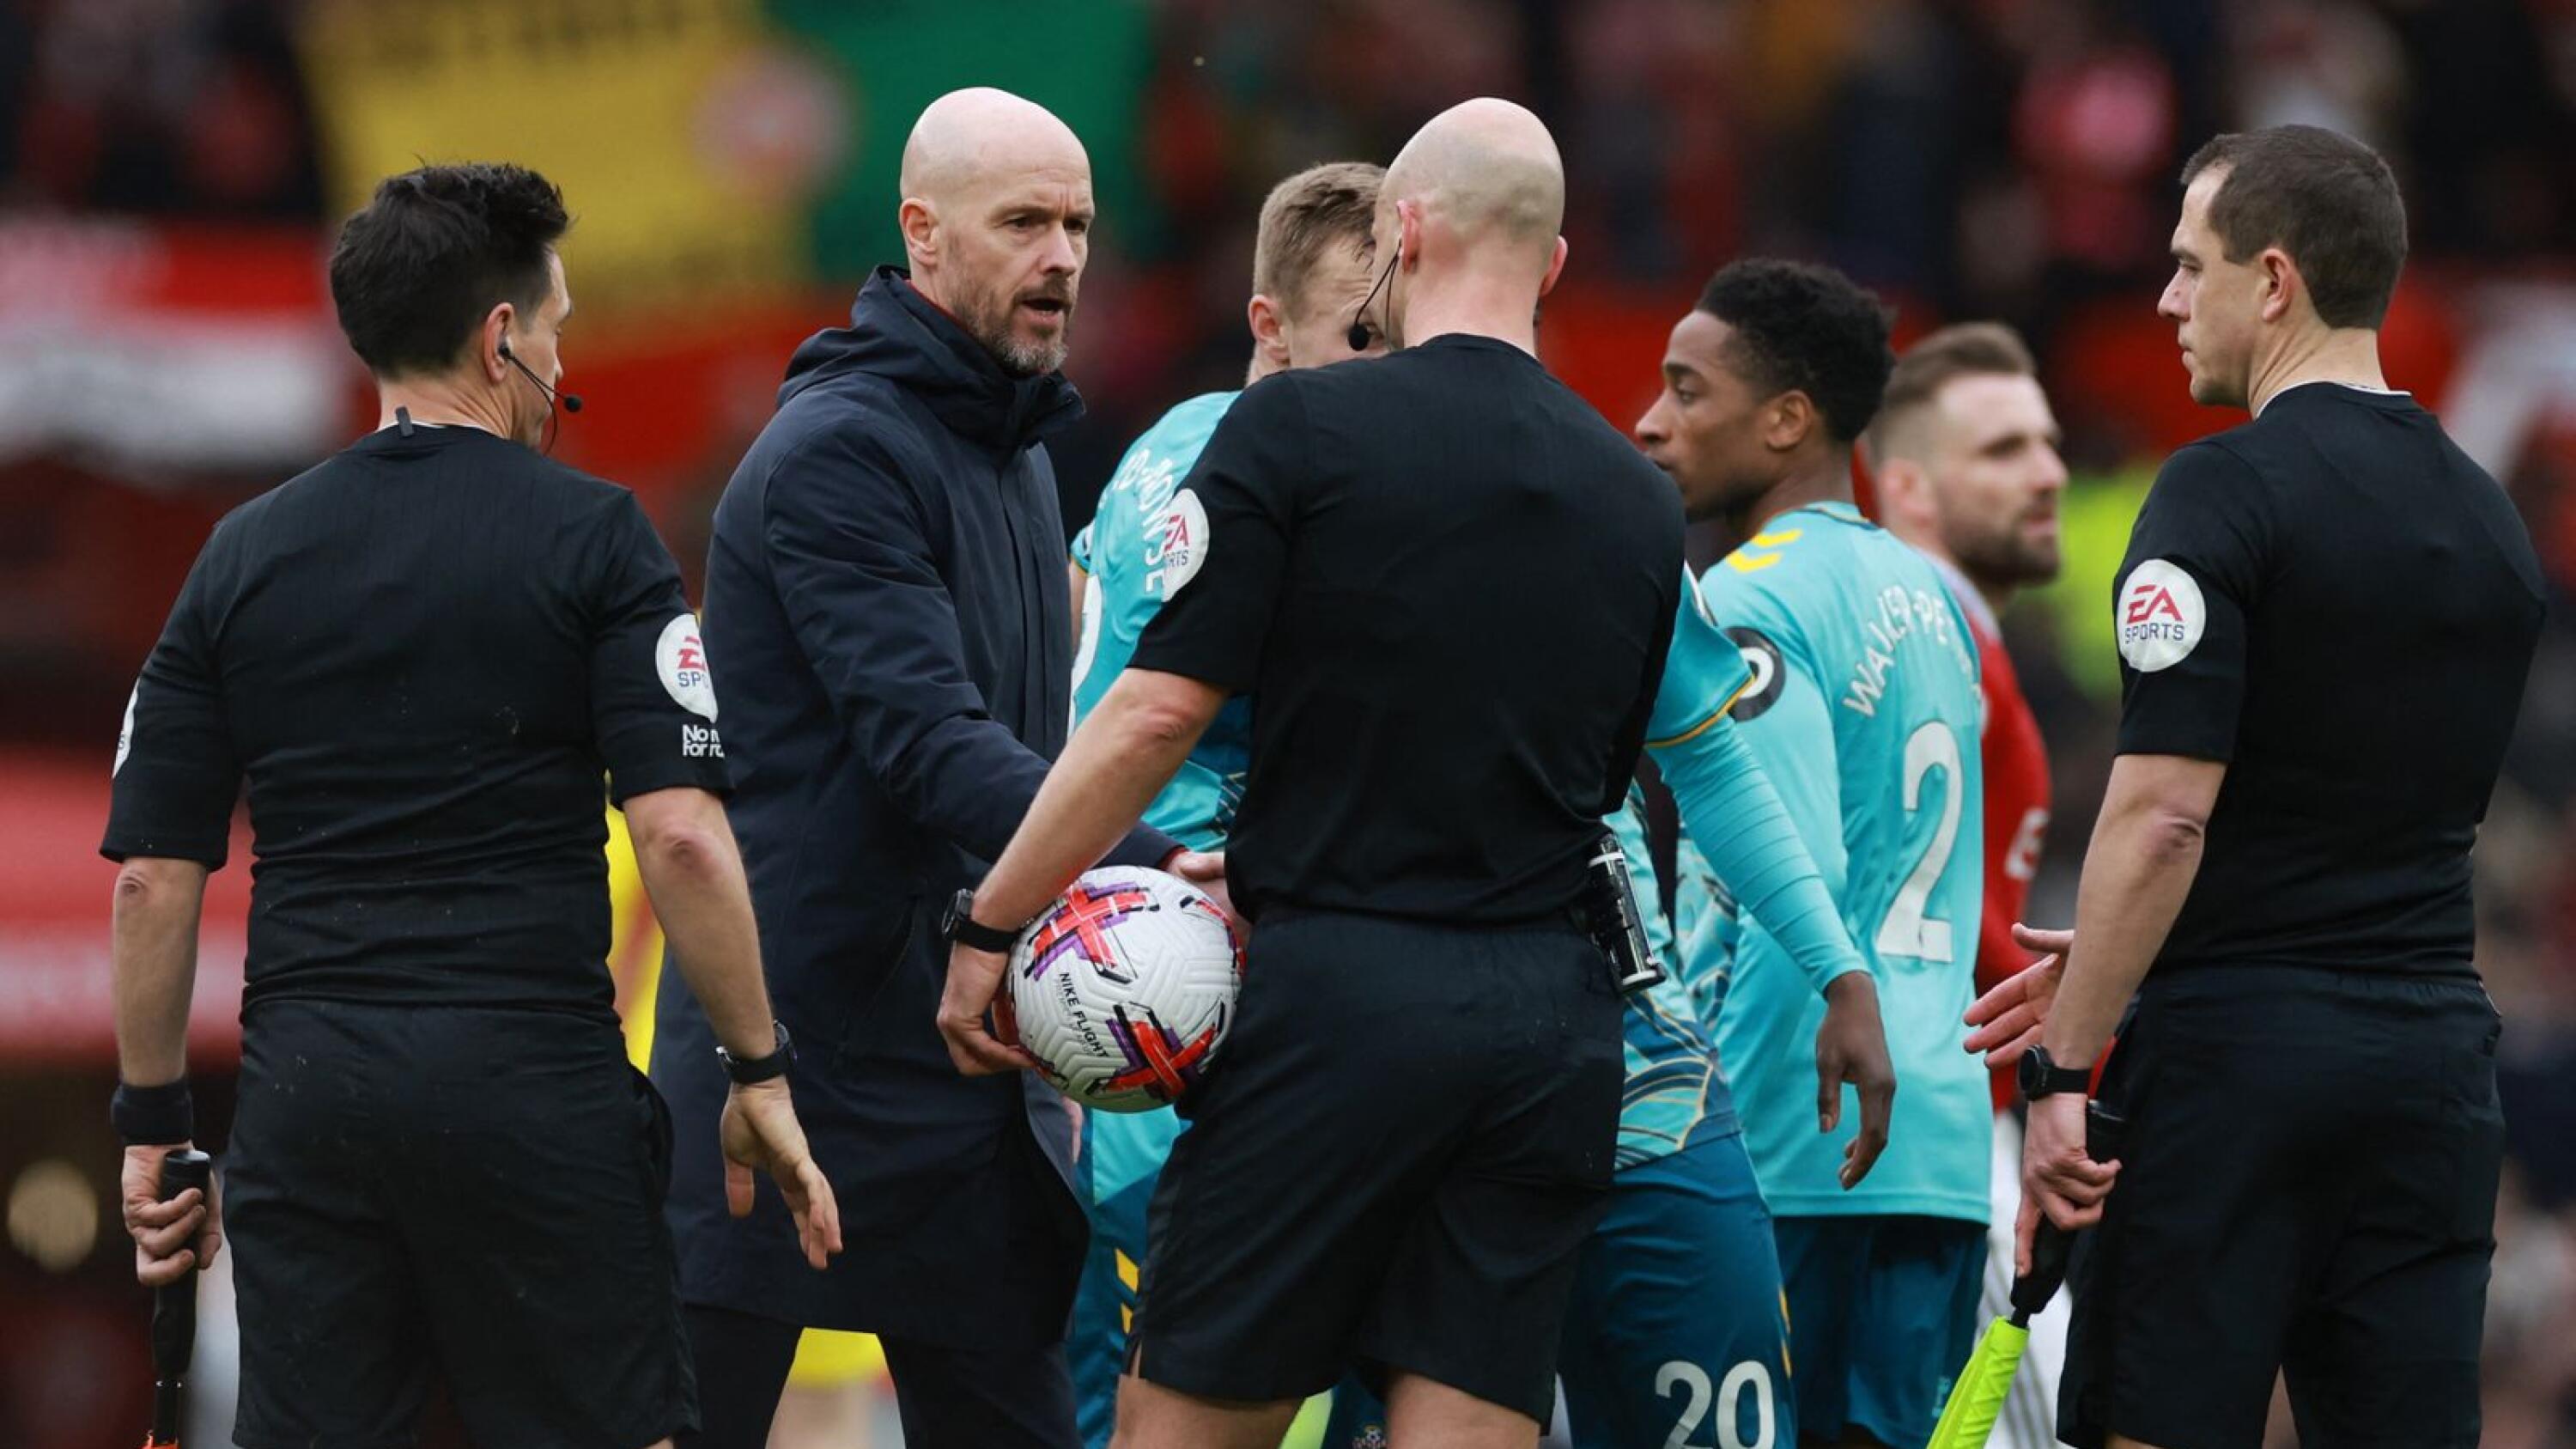 Manchester United manager Erik ten Hag shakes hands with referee Anthony Taylor after their Premier League match against Southampton at Old Trafford on Sunday